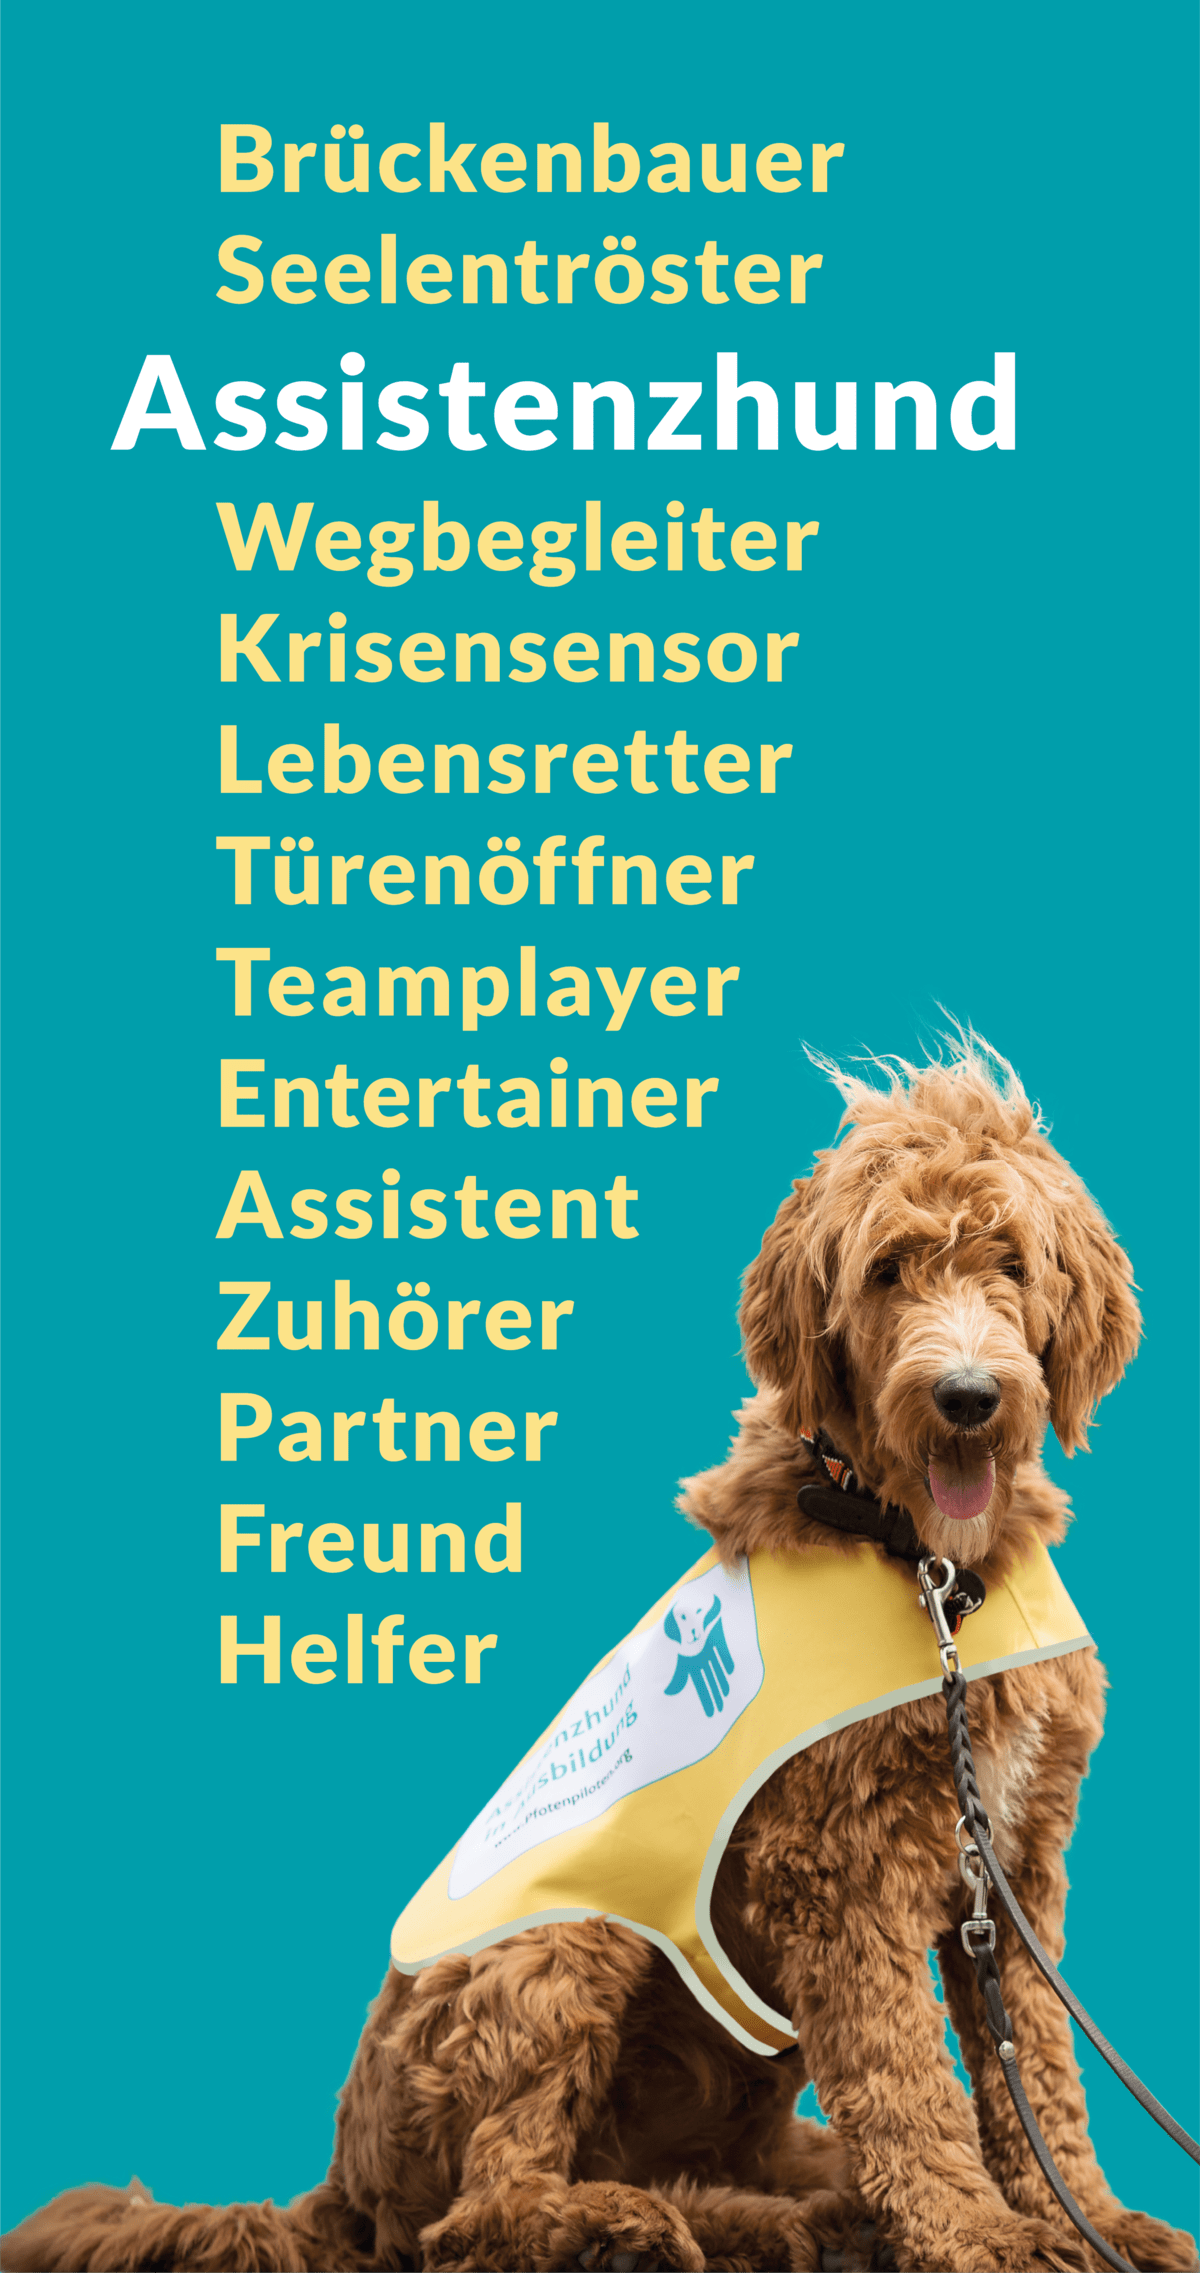 Graphic assistance dog synonyms :: Above and next to a light brown, shaggy Labradoodle assistance dog, along with the bold word 